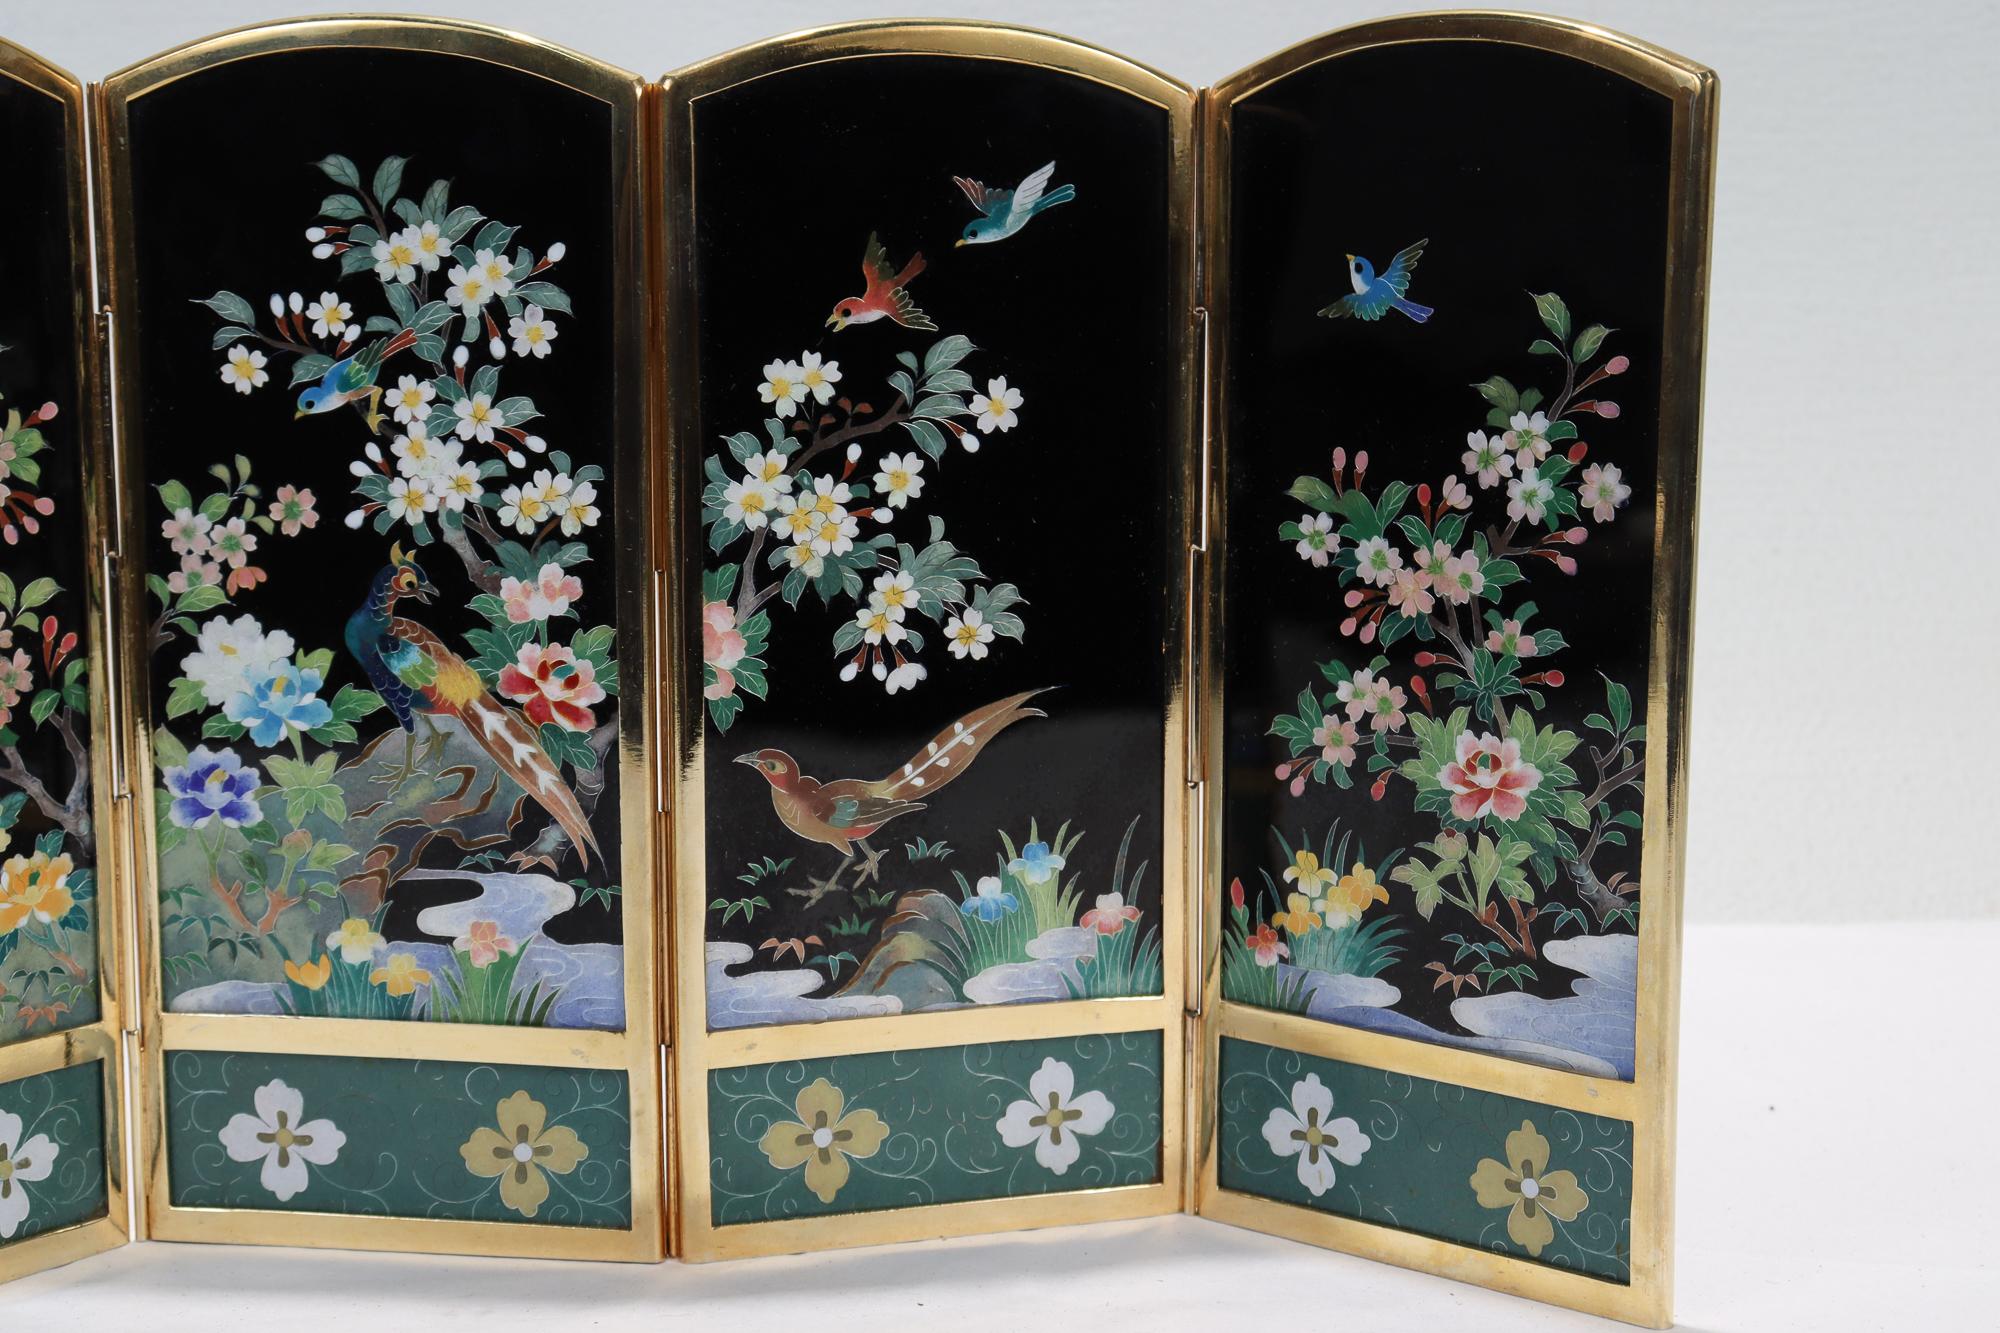 Meiji Old or Antique Japanese Inaba Cloisonne Table Screen with Birds & Flowers